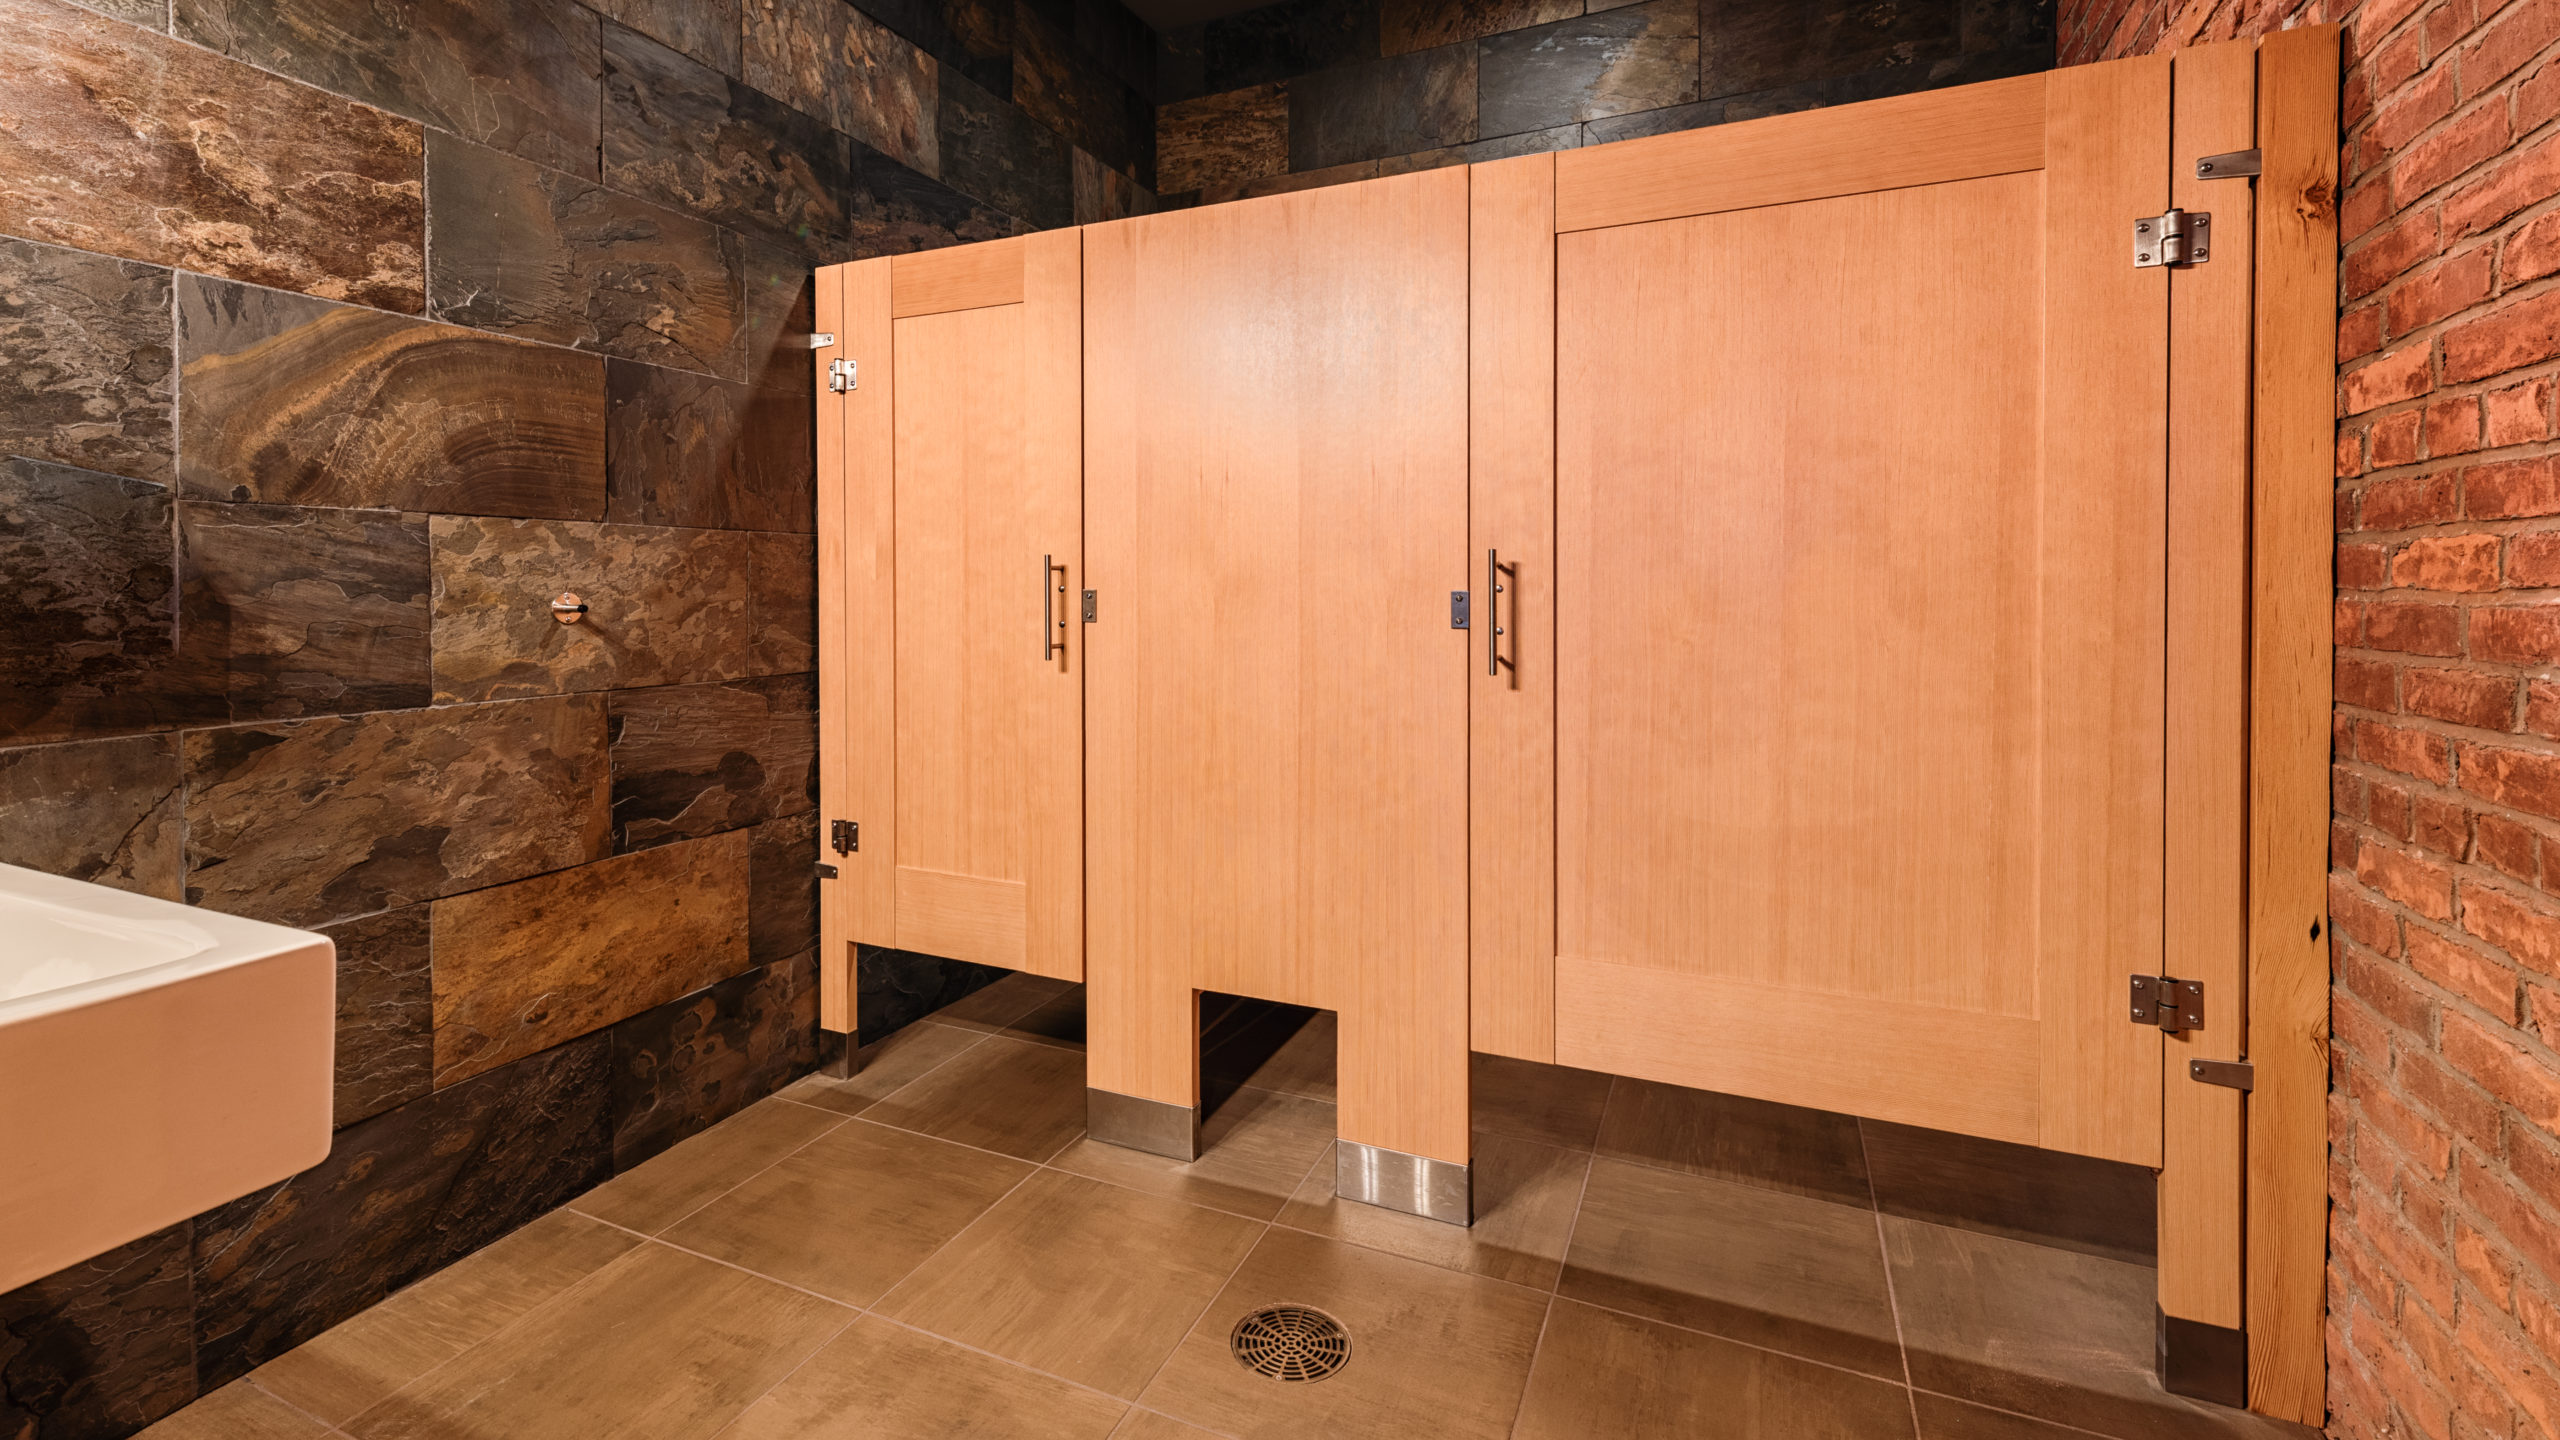 Earthy, urban bathroom features honey colored wood veneer partitions with two captured panel doors in floor mount style. Brick and slate walls.